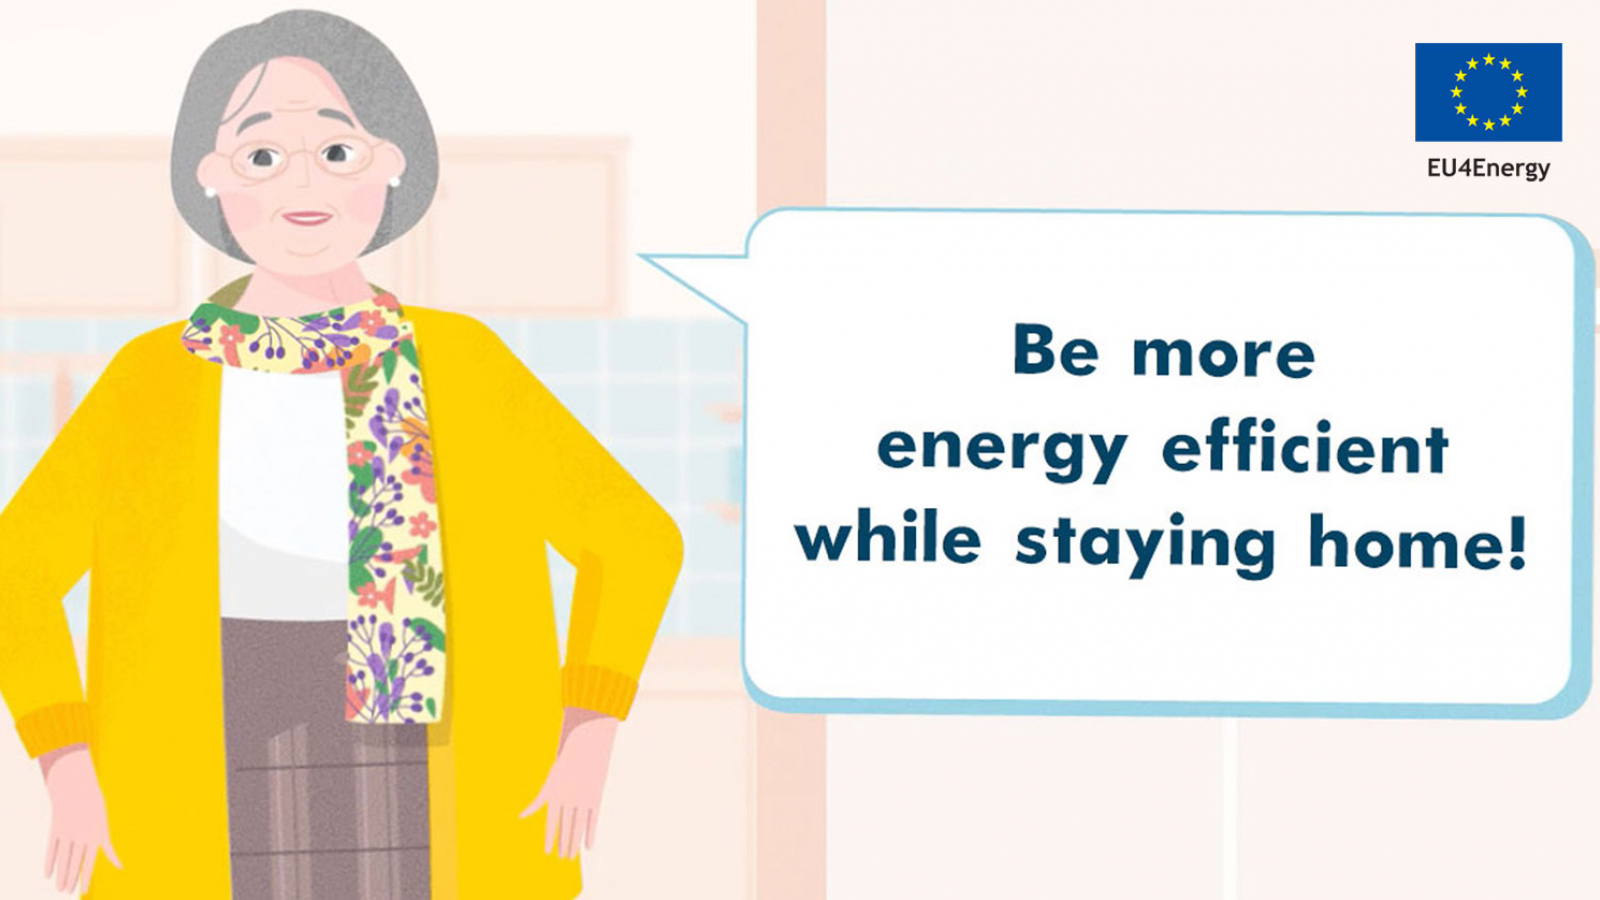 Take part in the #EU4Energy Babushka social media challenge and show us how energy efficient you are while staying at home!